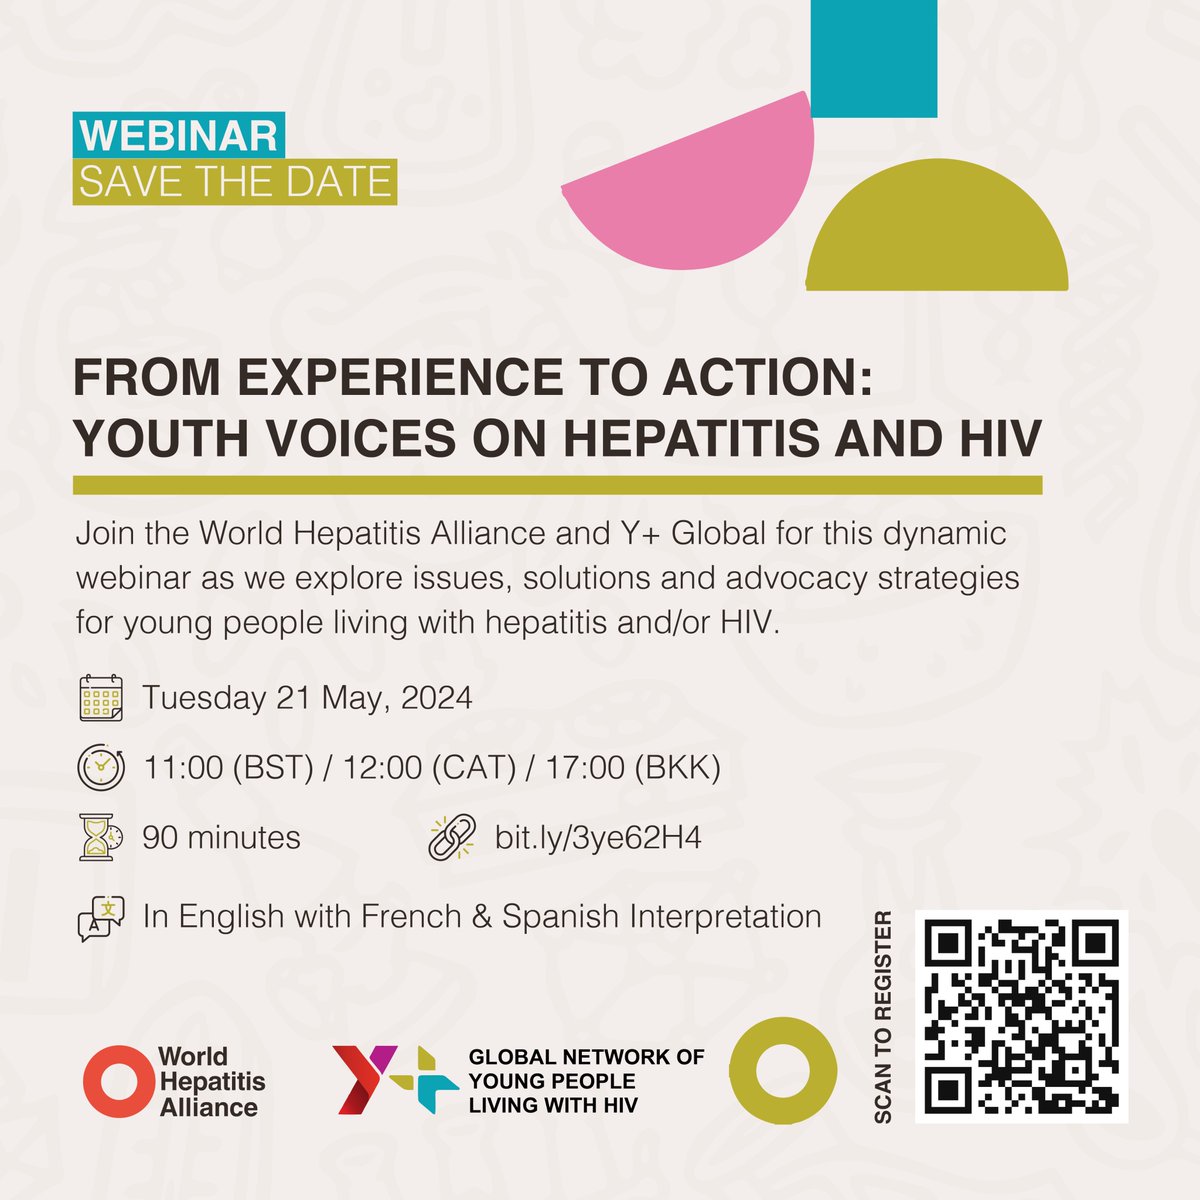 Join us for this upcoming webinar, 'From Experience to Action: Youth Voices on Hepatitis and HIV' hosted by Y+ Global and @Hep_Alliance. Be a part of the conversation! 📆Tuesday, 21 May 2024 ⏰ 11:00 (BST)/12:00 (CAT) 🔗 bit.ly/3ye62H4